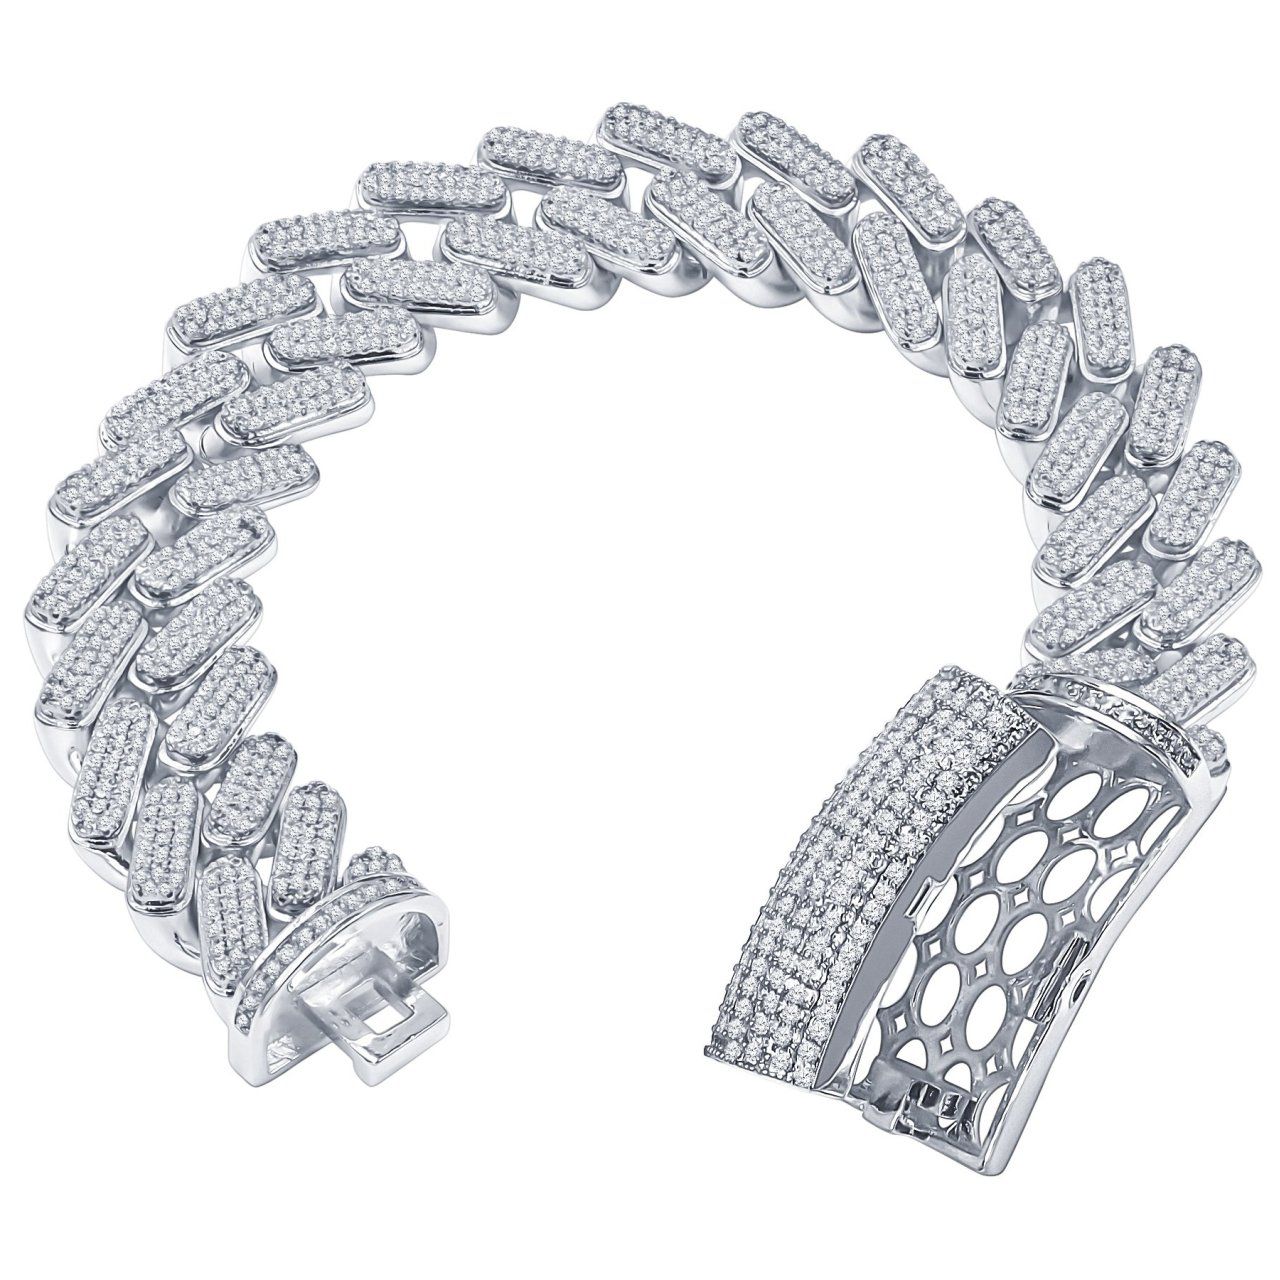 Iced Out Bling MIAMI CUBAN Panzerkette Armband – NOBBY 17mm